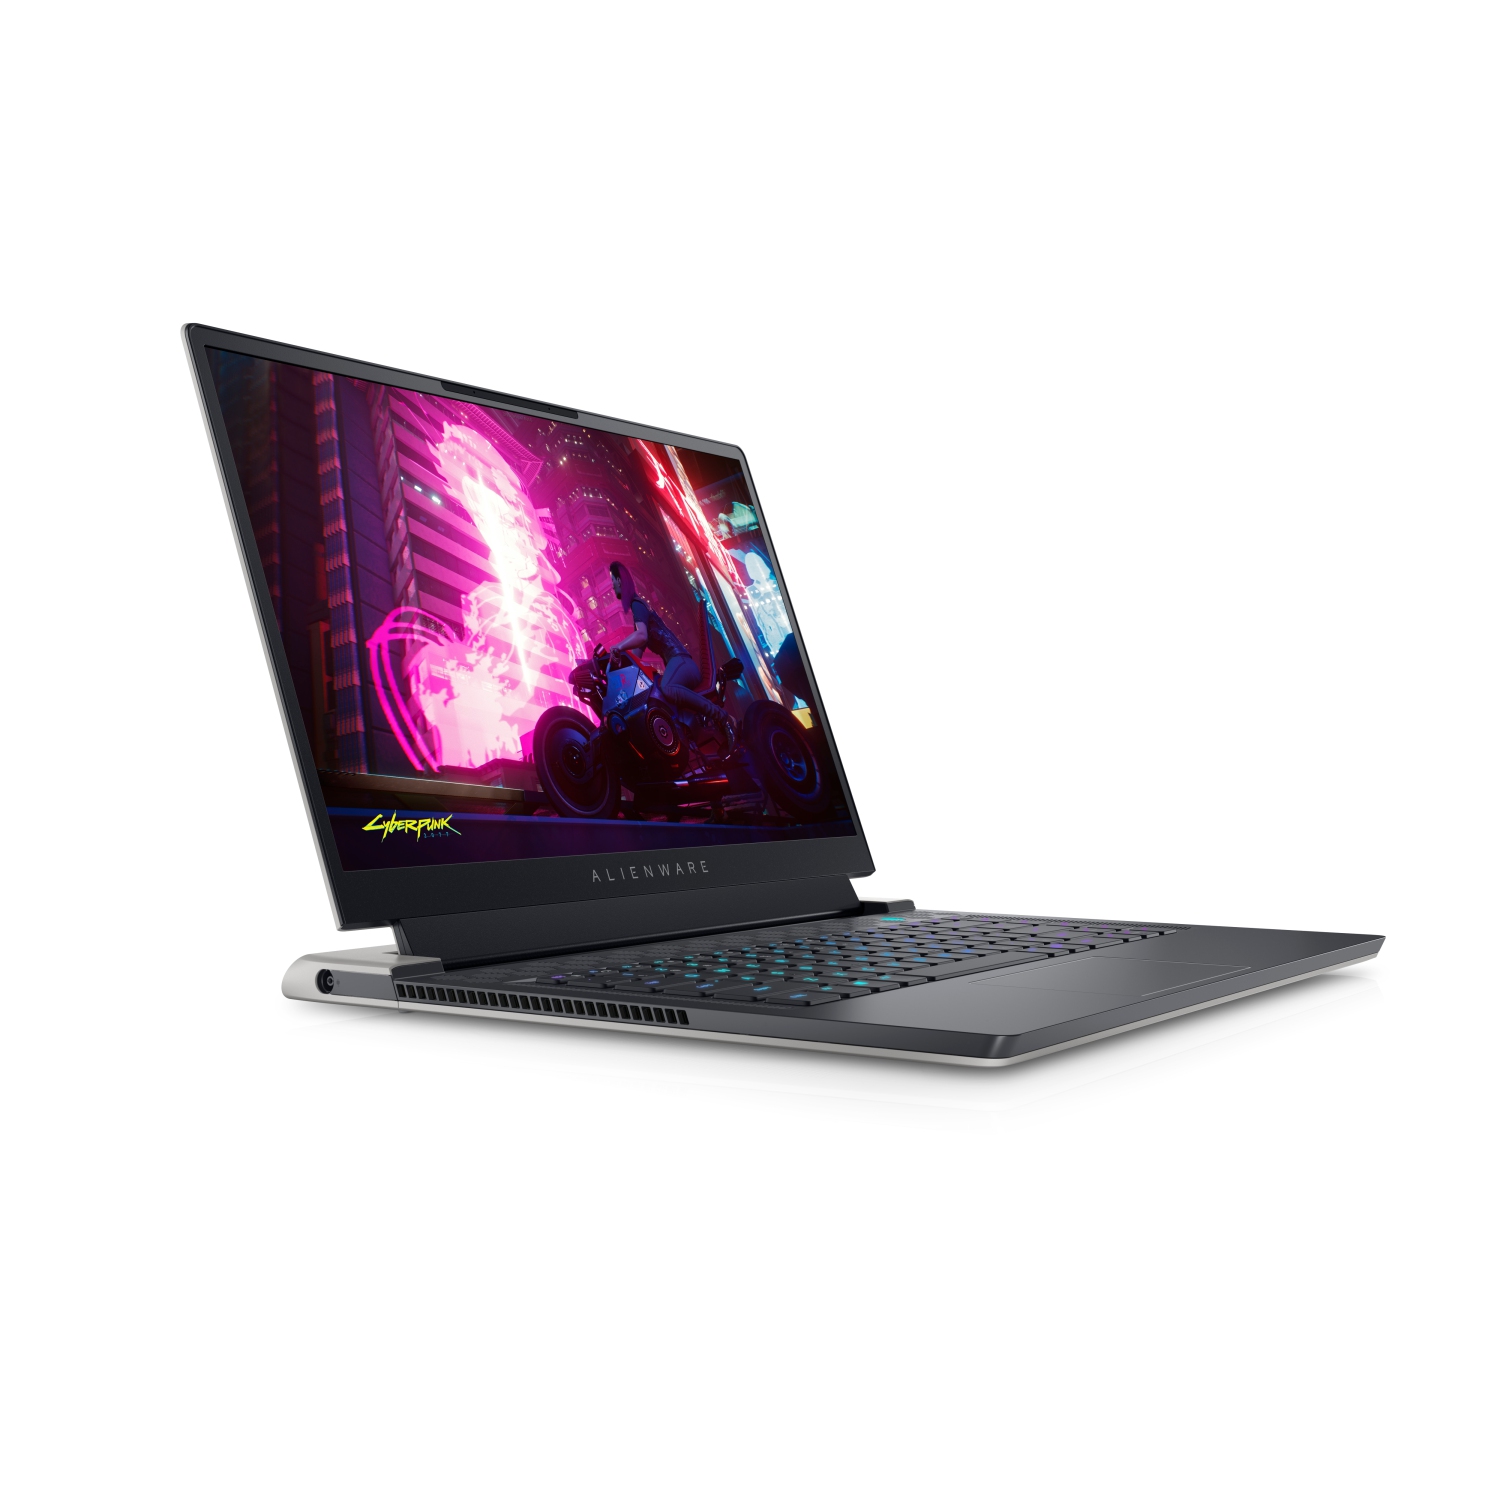 Refurbished (Excellent) - Dell Alienware X15 R1 Gaming Laptop (2021), 15.6" FHD, Core i7, 512GB SSD, 32GB RAM, RTX 3070, 8 Cores @ 4.6 GHz, 11th Gen CPU Certified